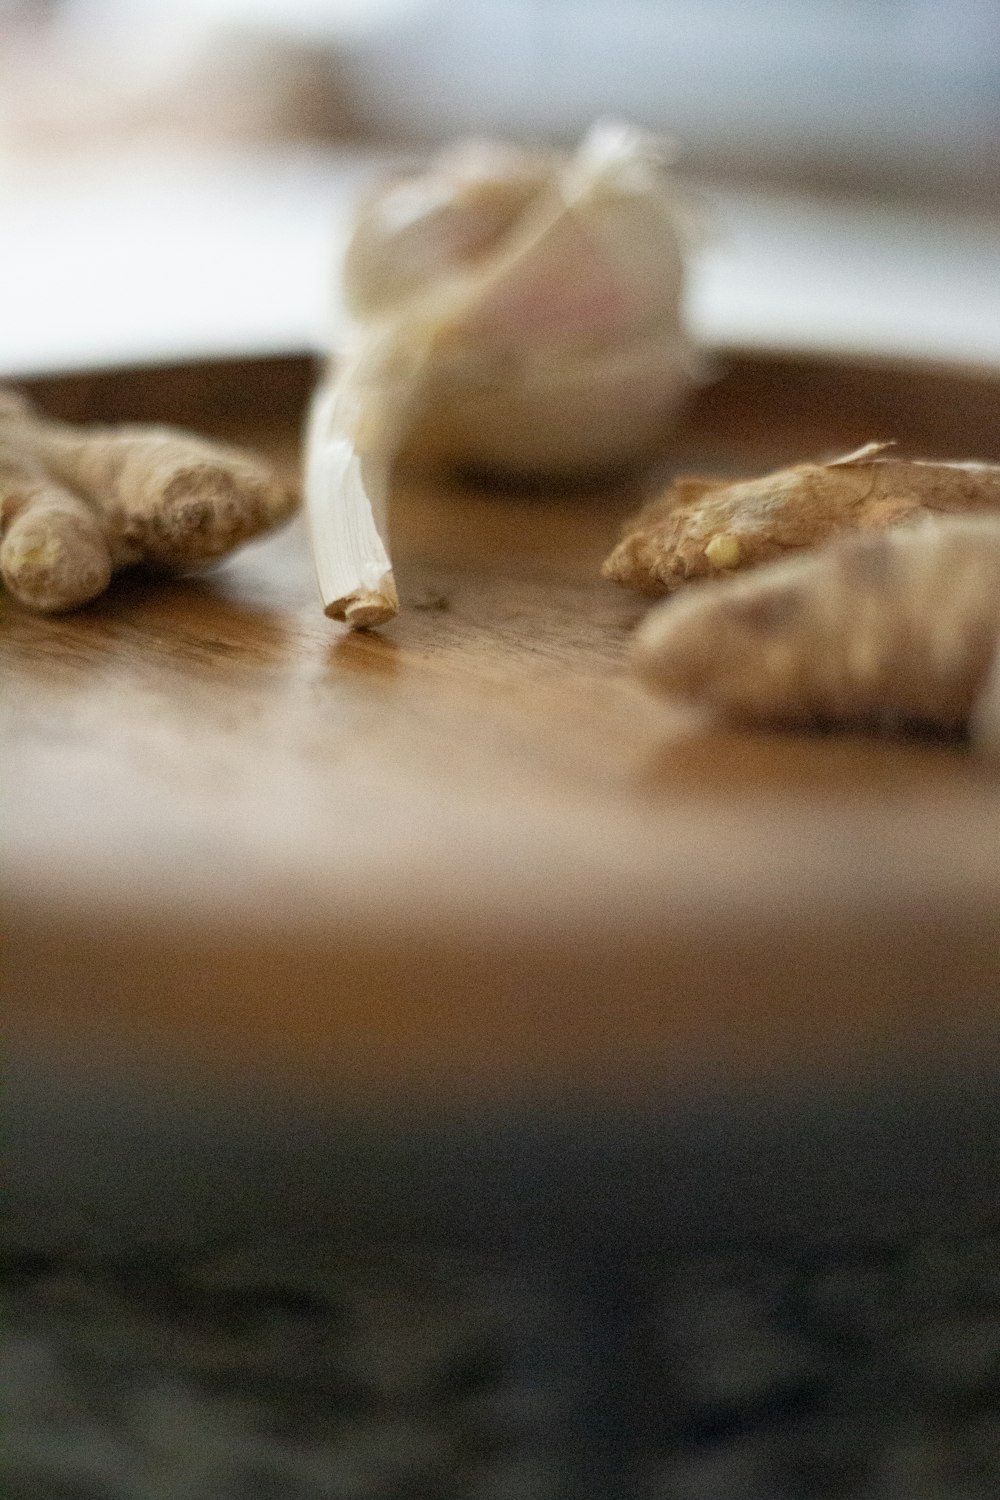 a close up of a piece of food on a table